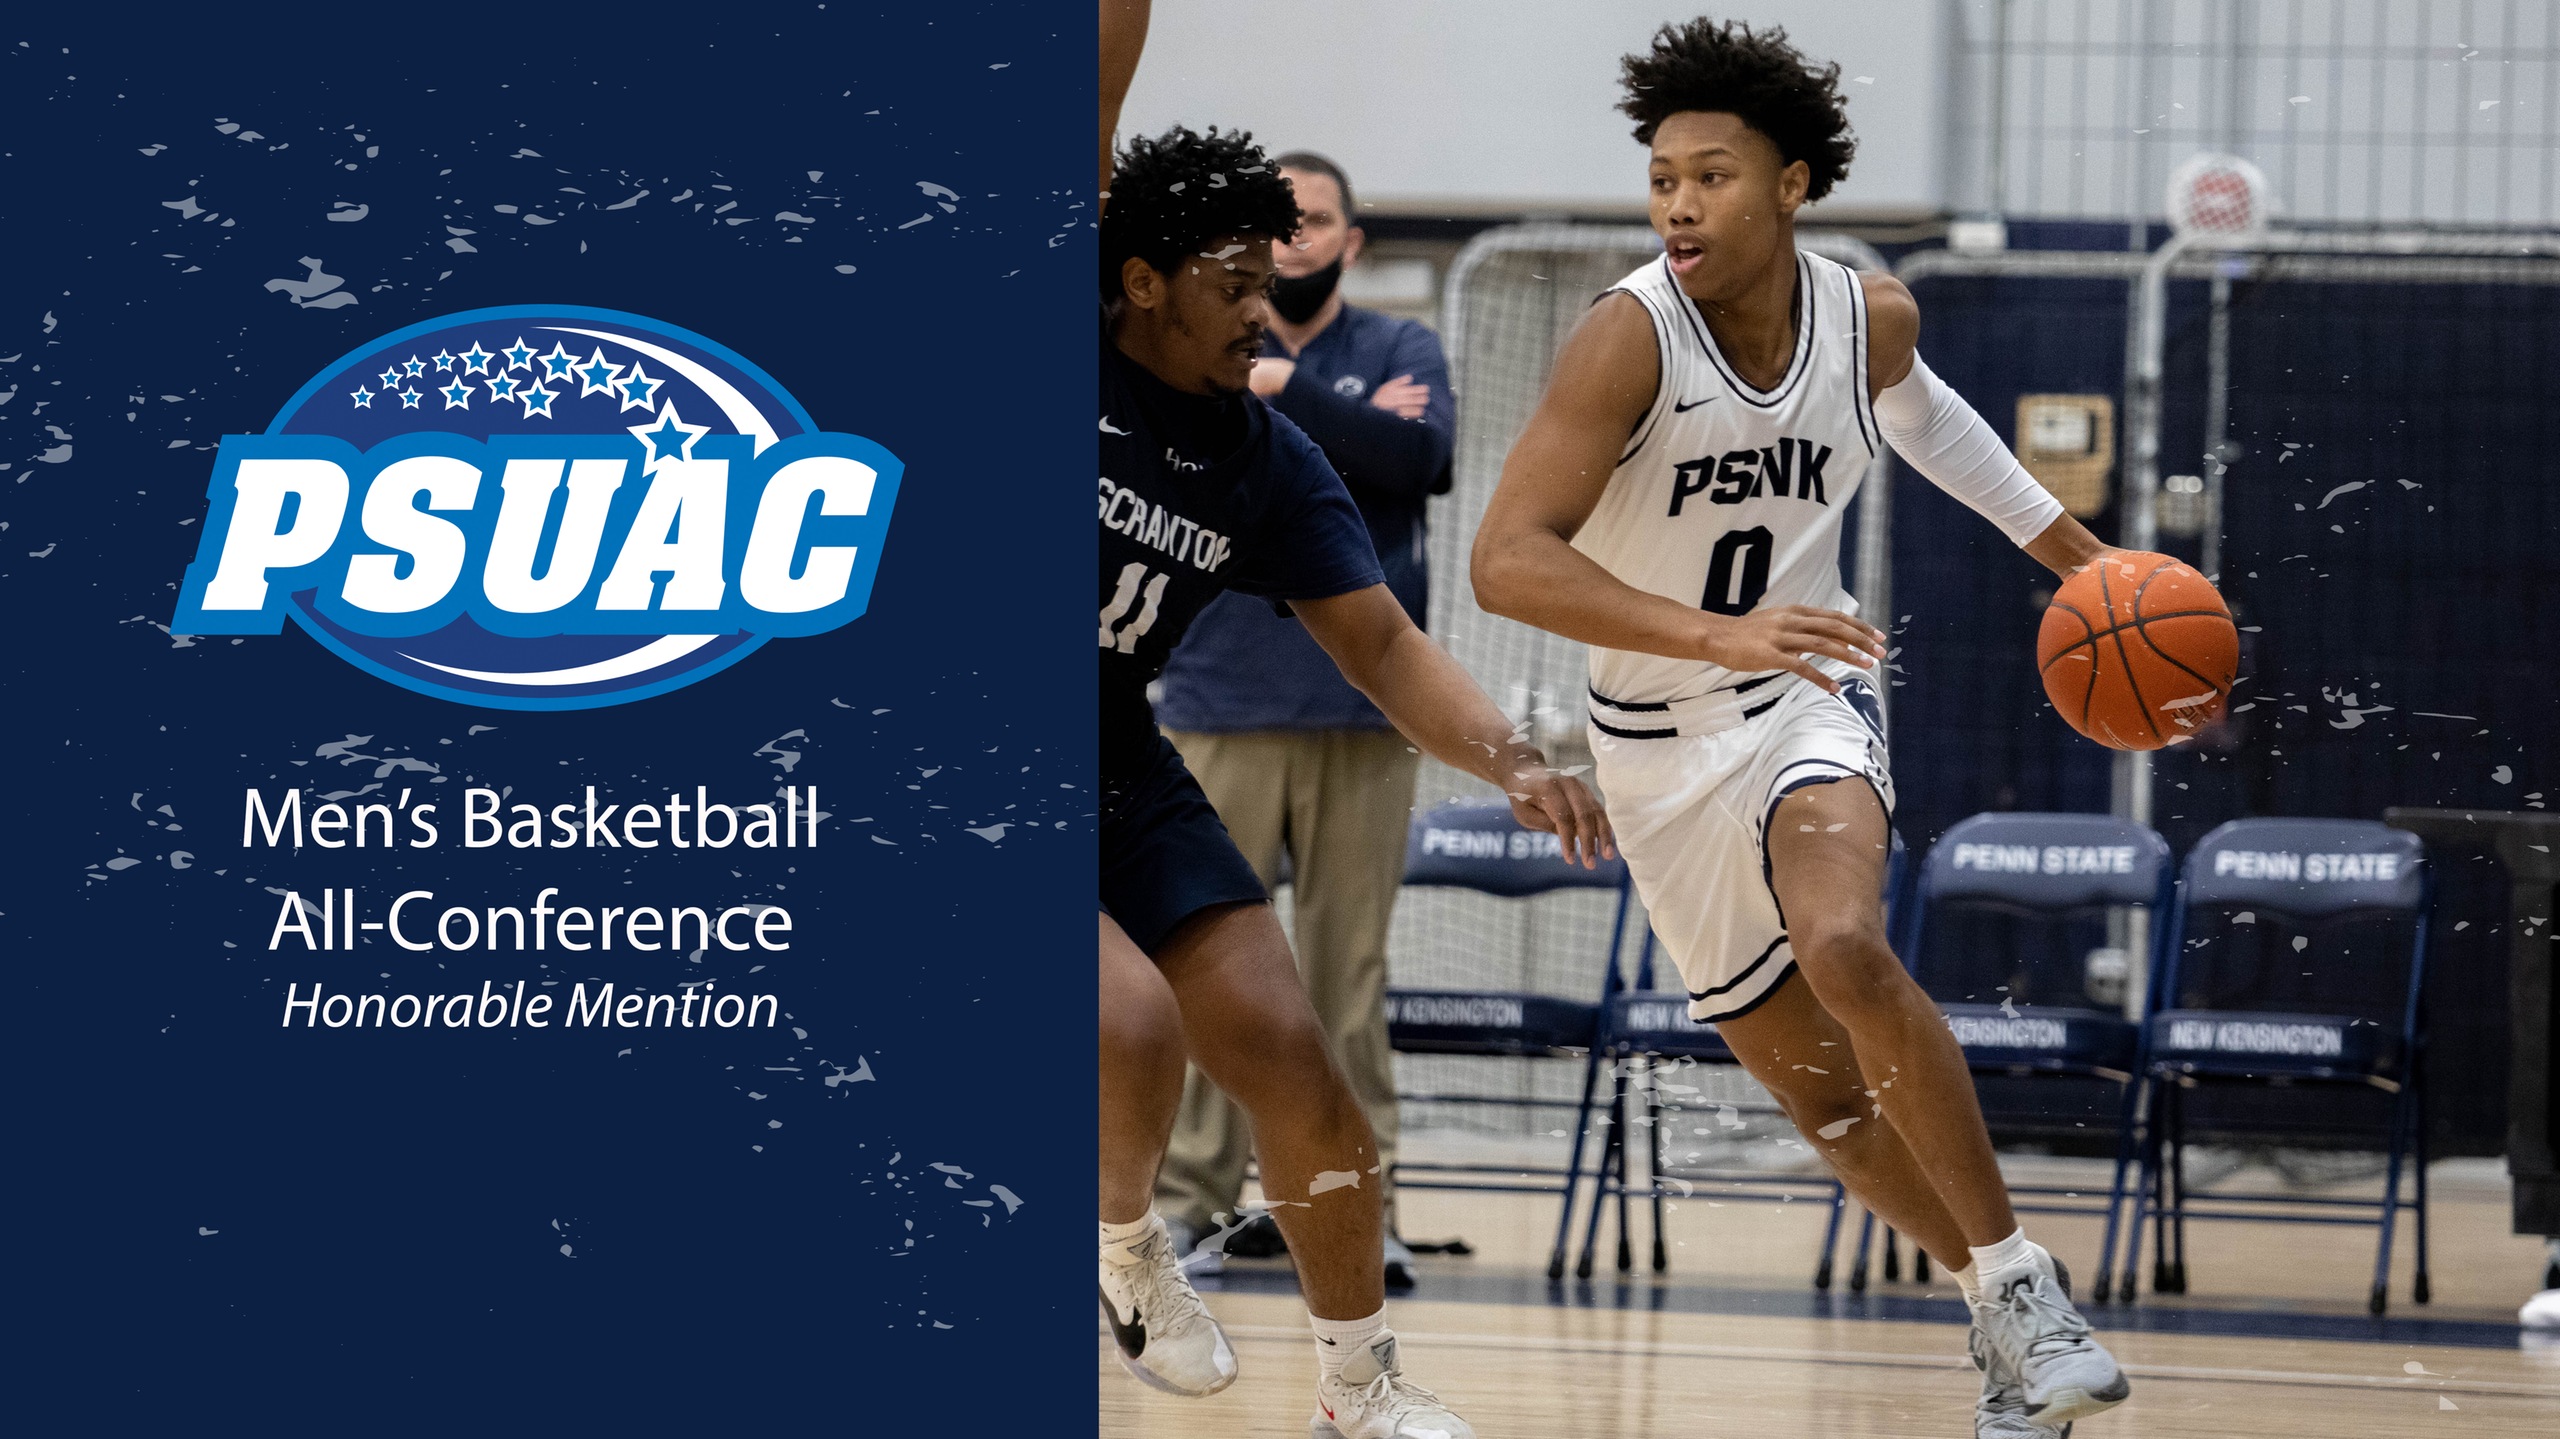 Aubrey Feaster - PSUAC Men's Basketball All-Conference Honorable Mention